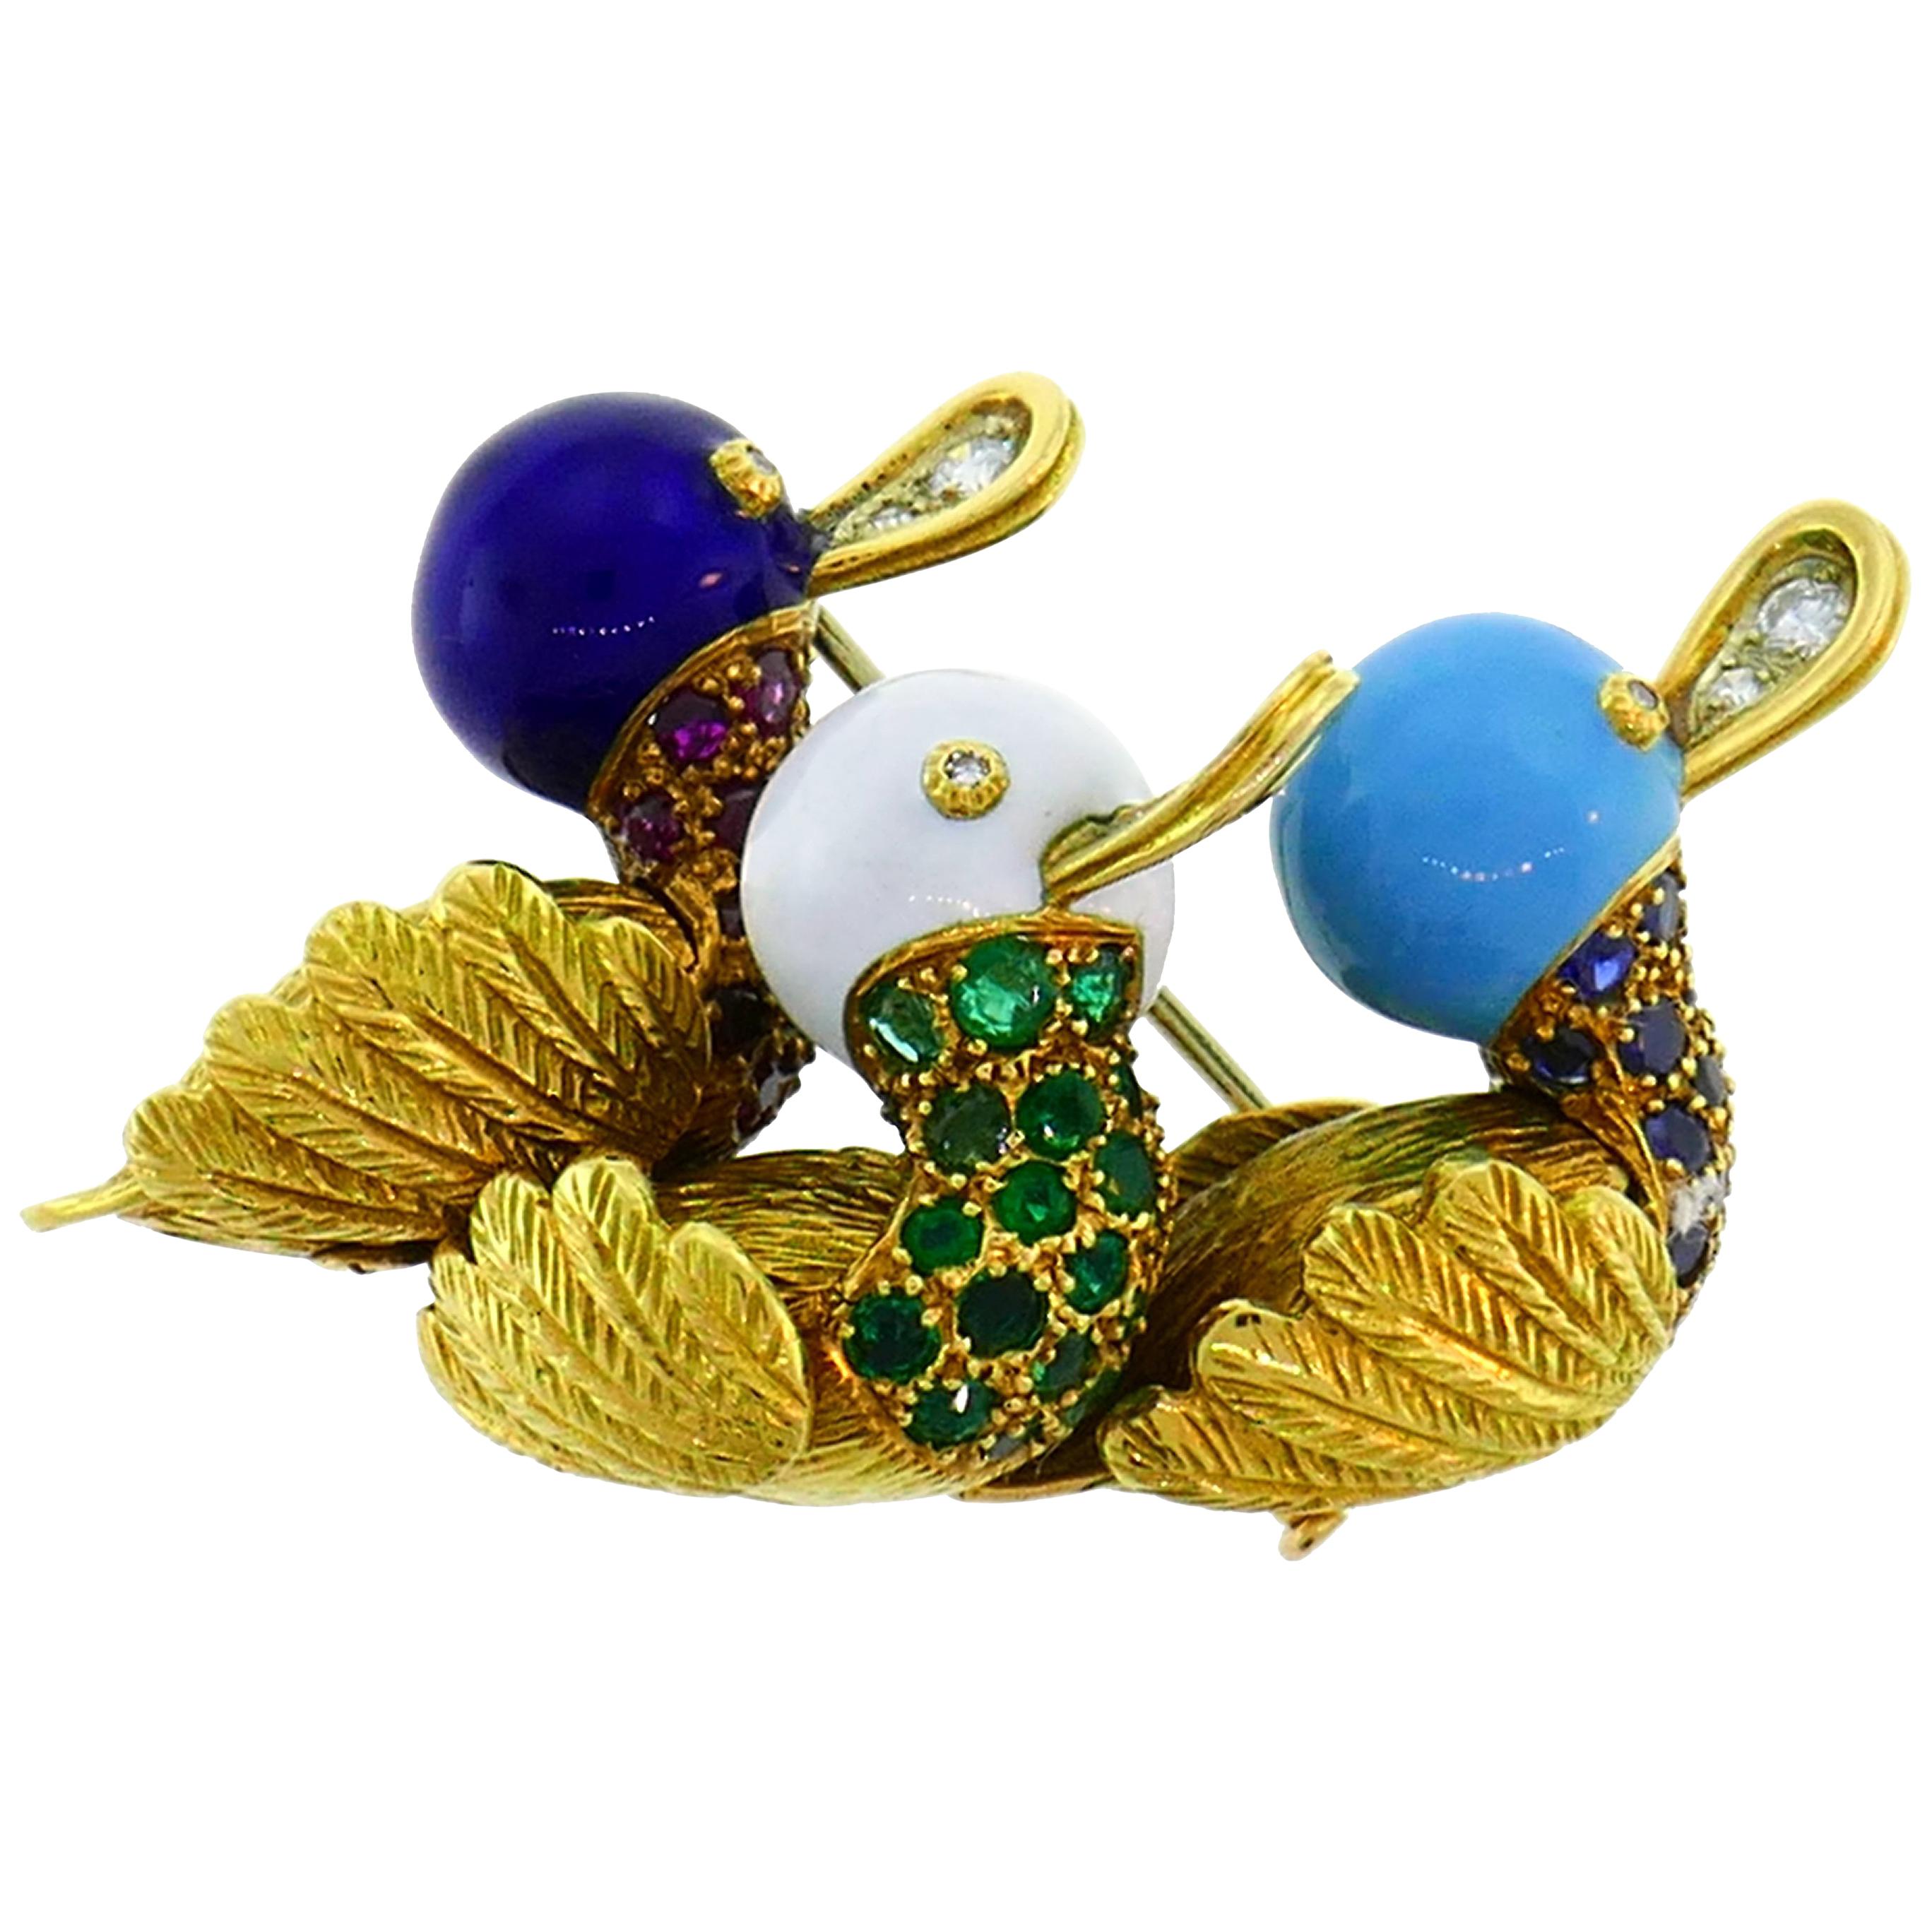 French Vintage Brooch 18k Gold Enamel Gems Duck Pin Clip Estate Jewelry For Sale